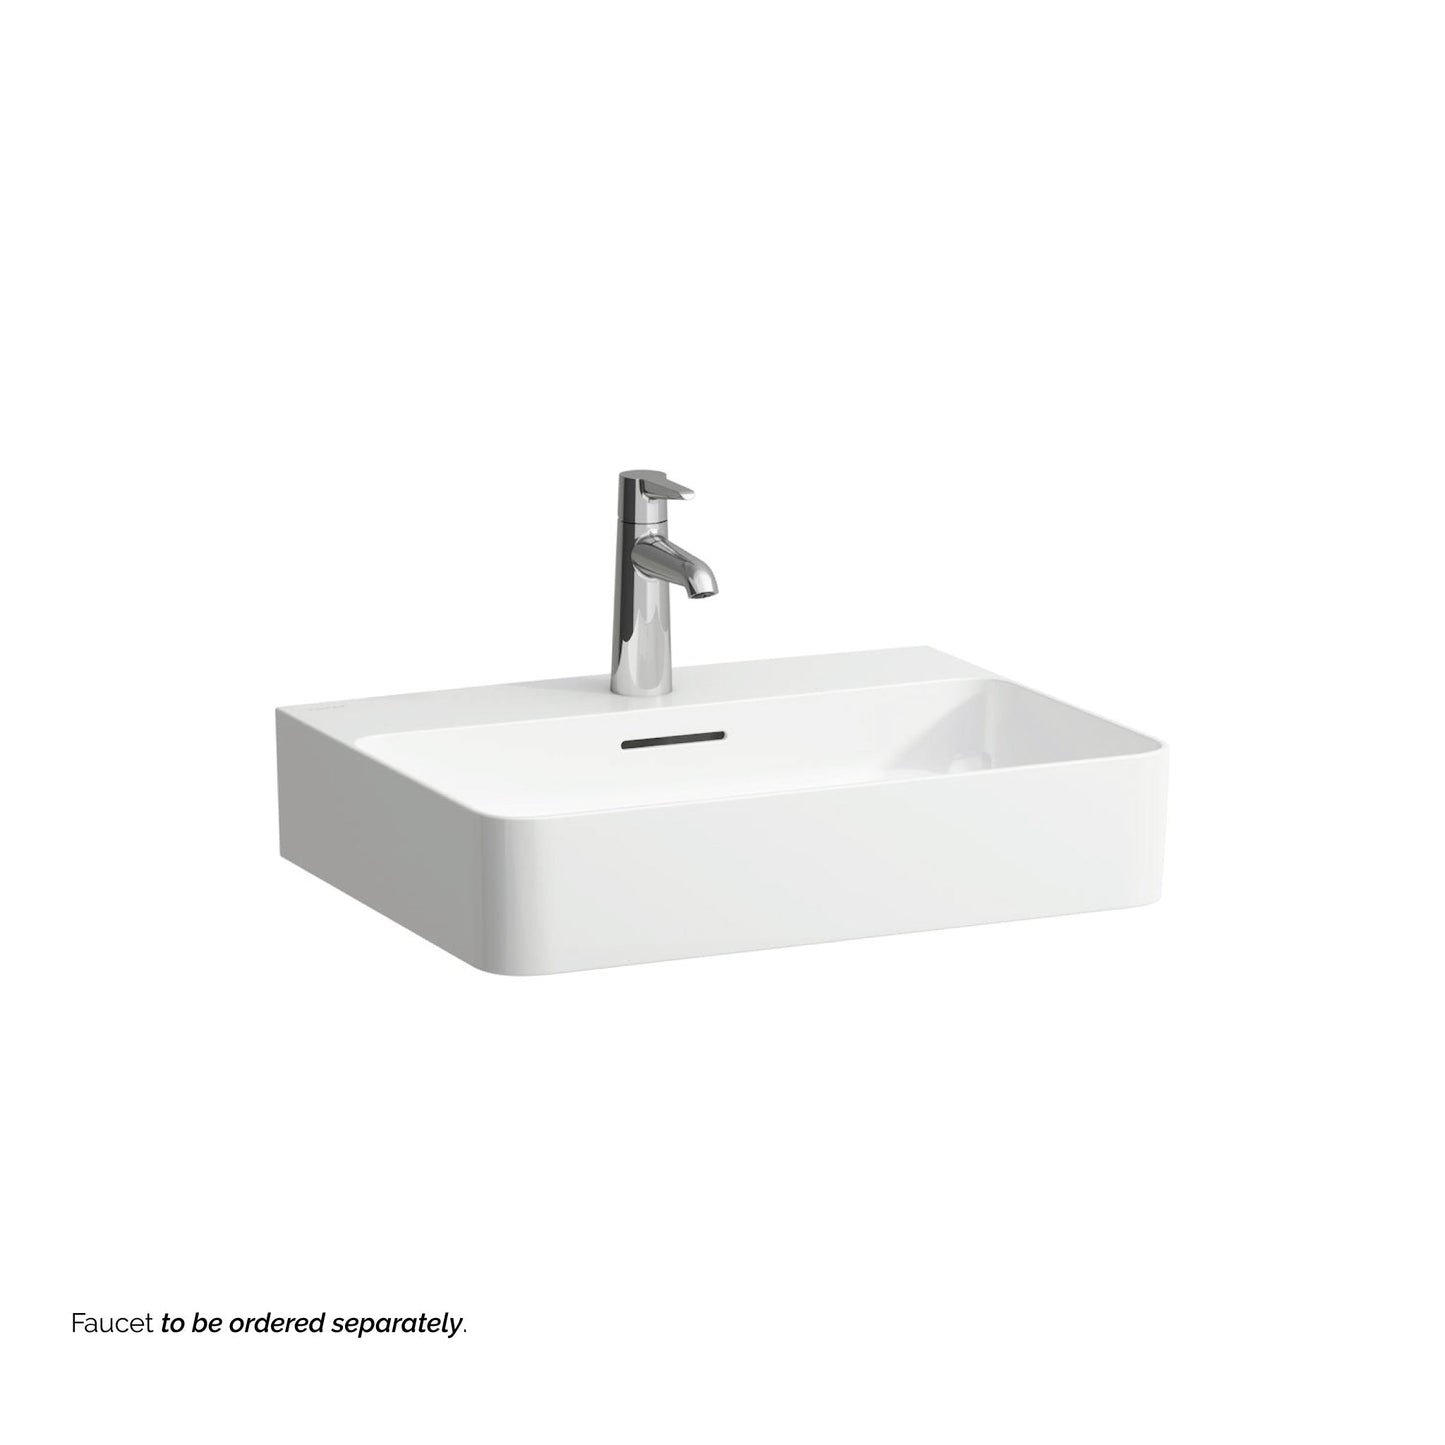 Laufen Val 22" x 17" Matte White Ceramic Countertop Bathroom Sink With Faucet Hole